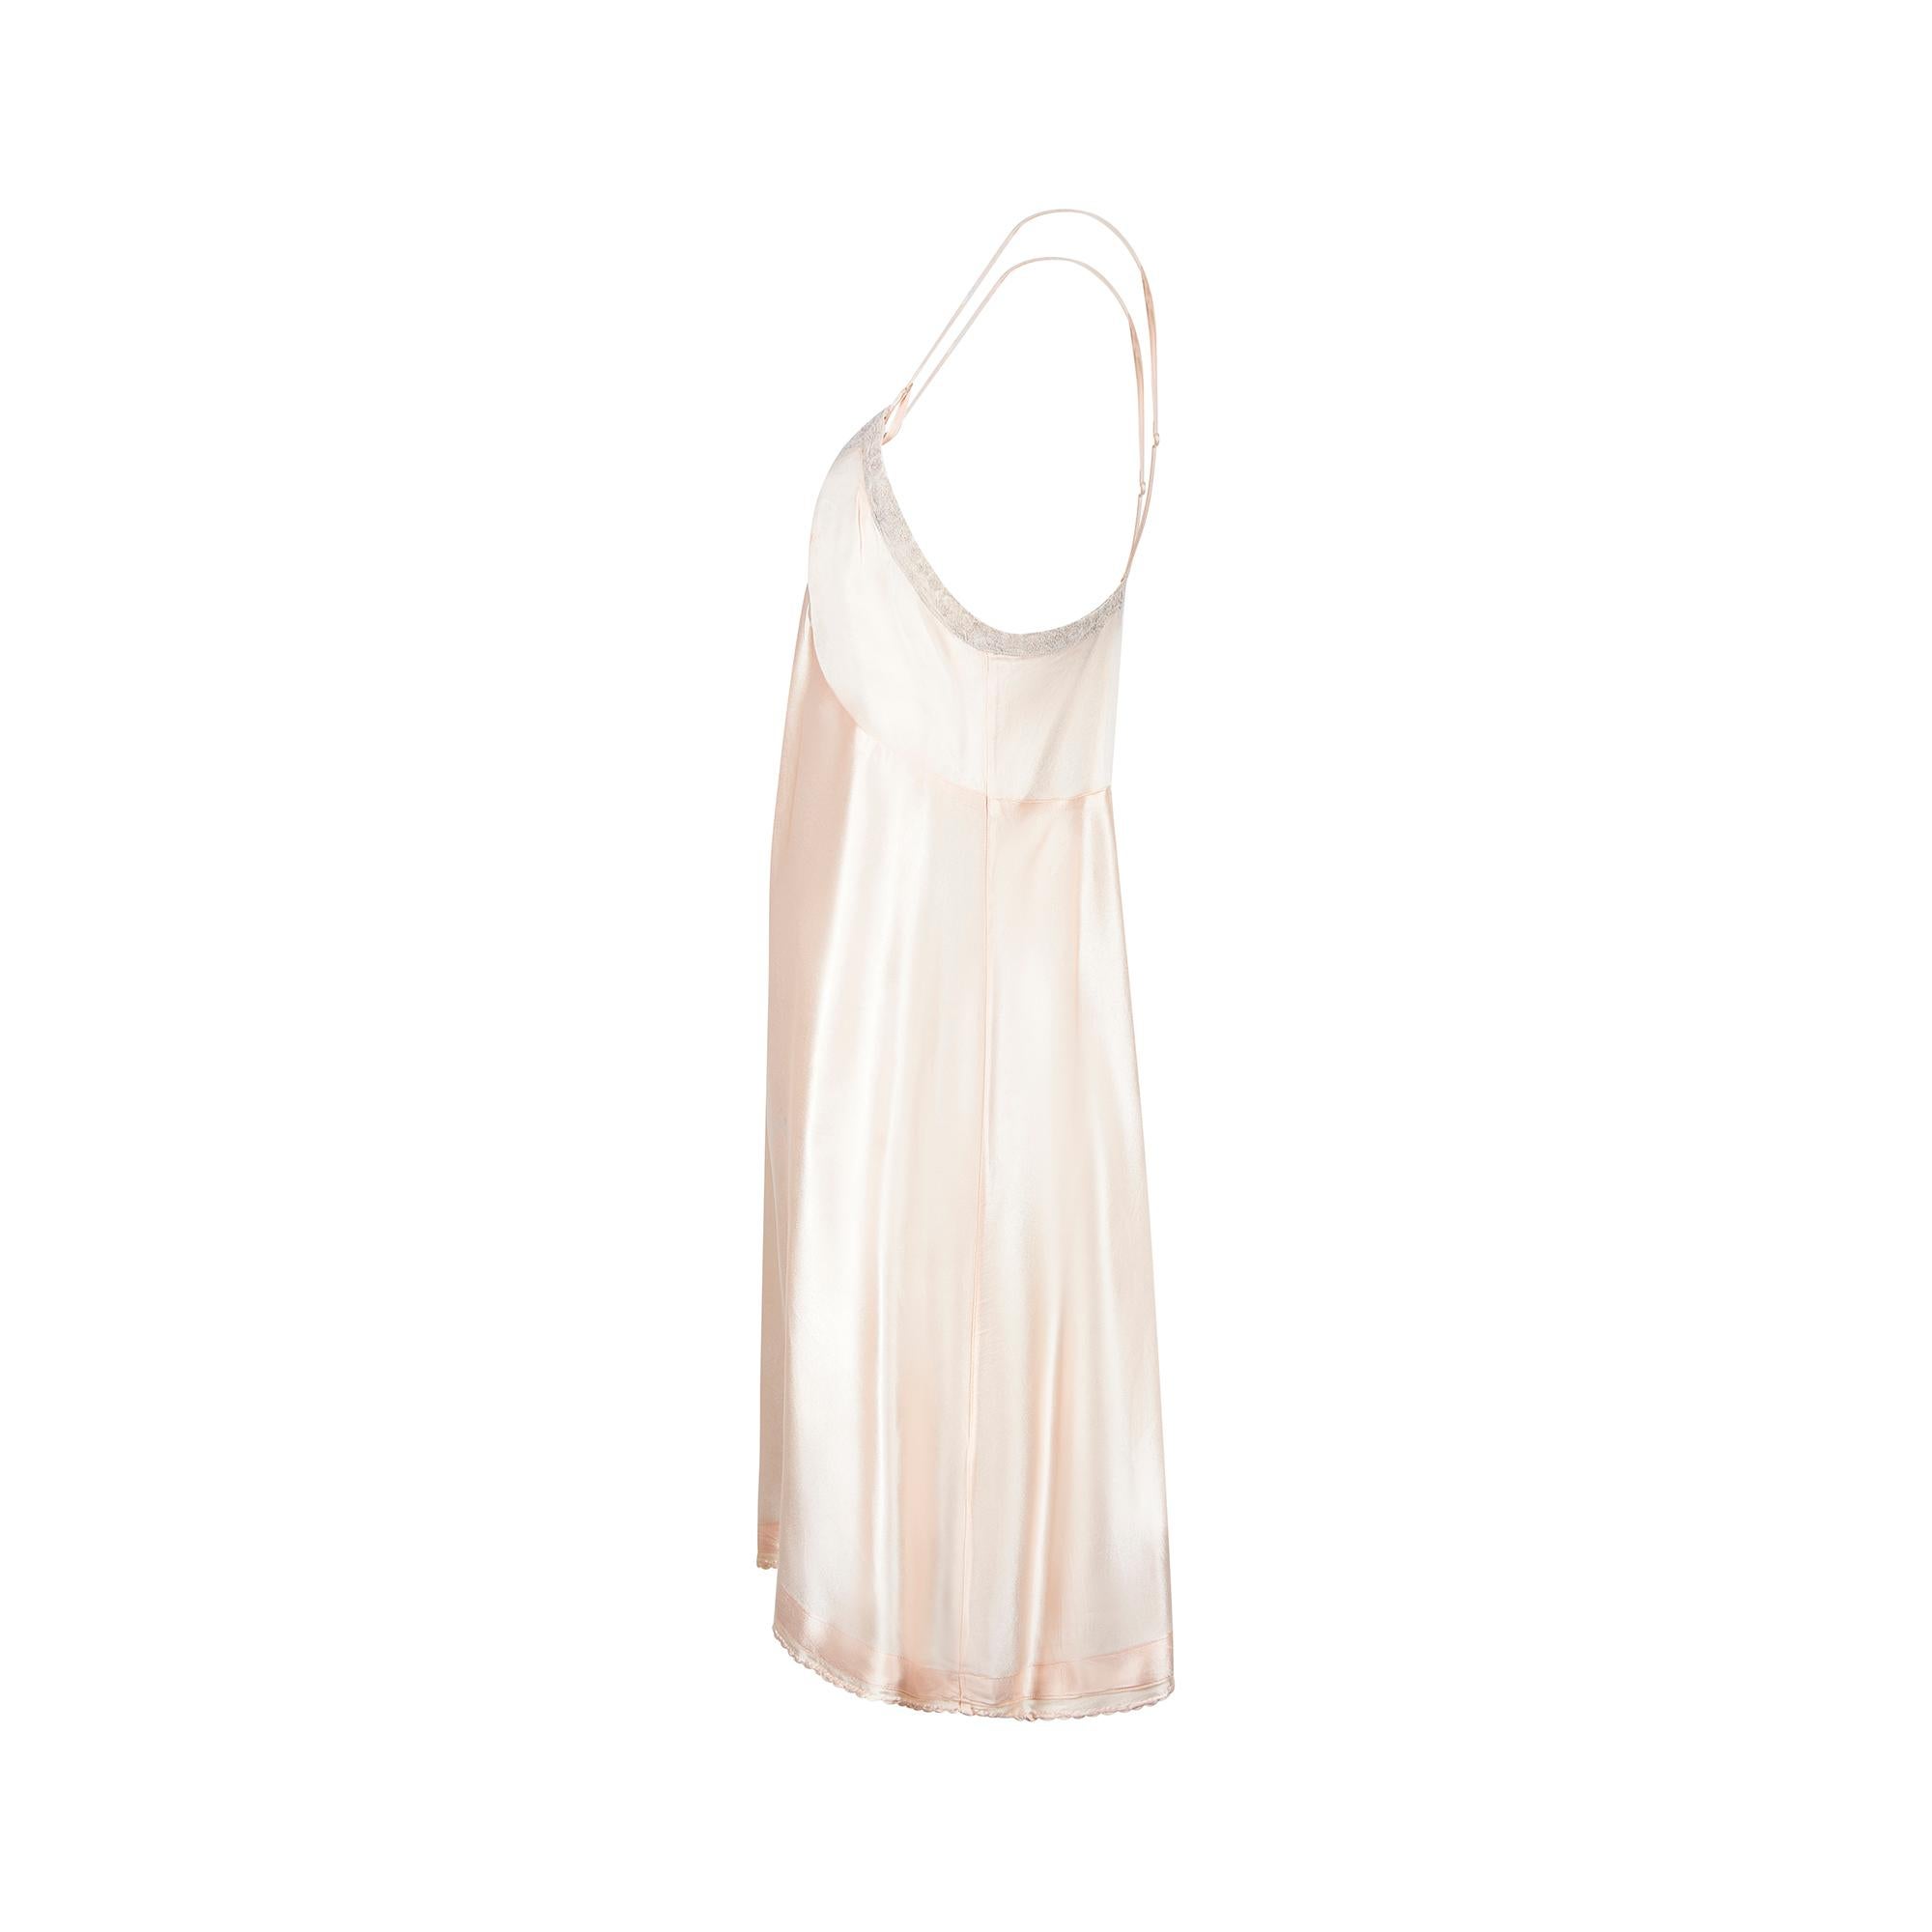 Slip dresses of the 1930s are highly collectable and this is a truly lovely example. They are prized for their wearability and the luxuriousness of the fabrics as well as the simple grace of their silhouettes. This slip is crafted from pale peachy